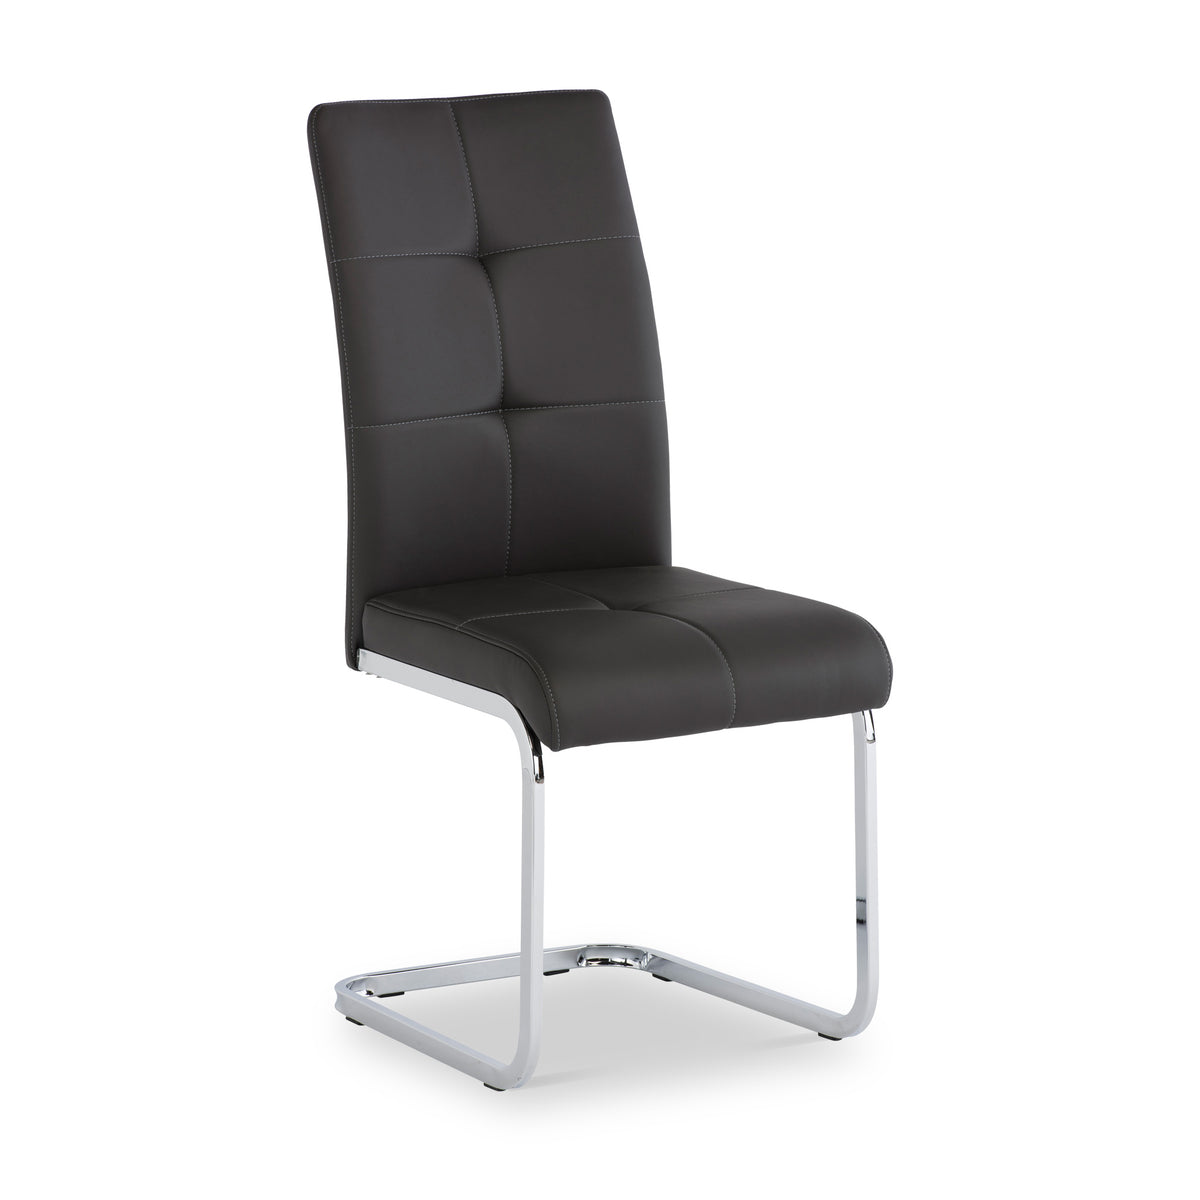 Flo Charcoal Faux Leather Dining Chair from Roseland furniture